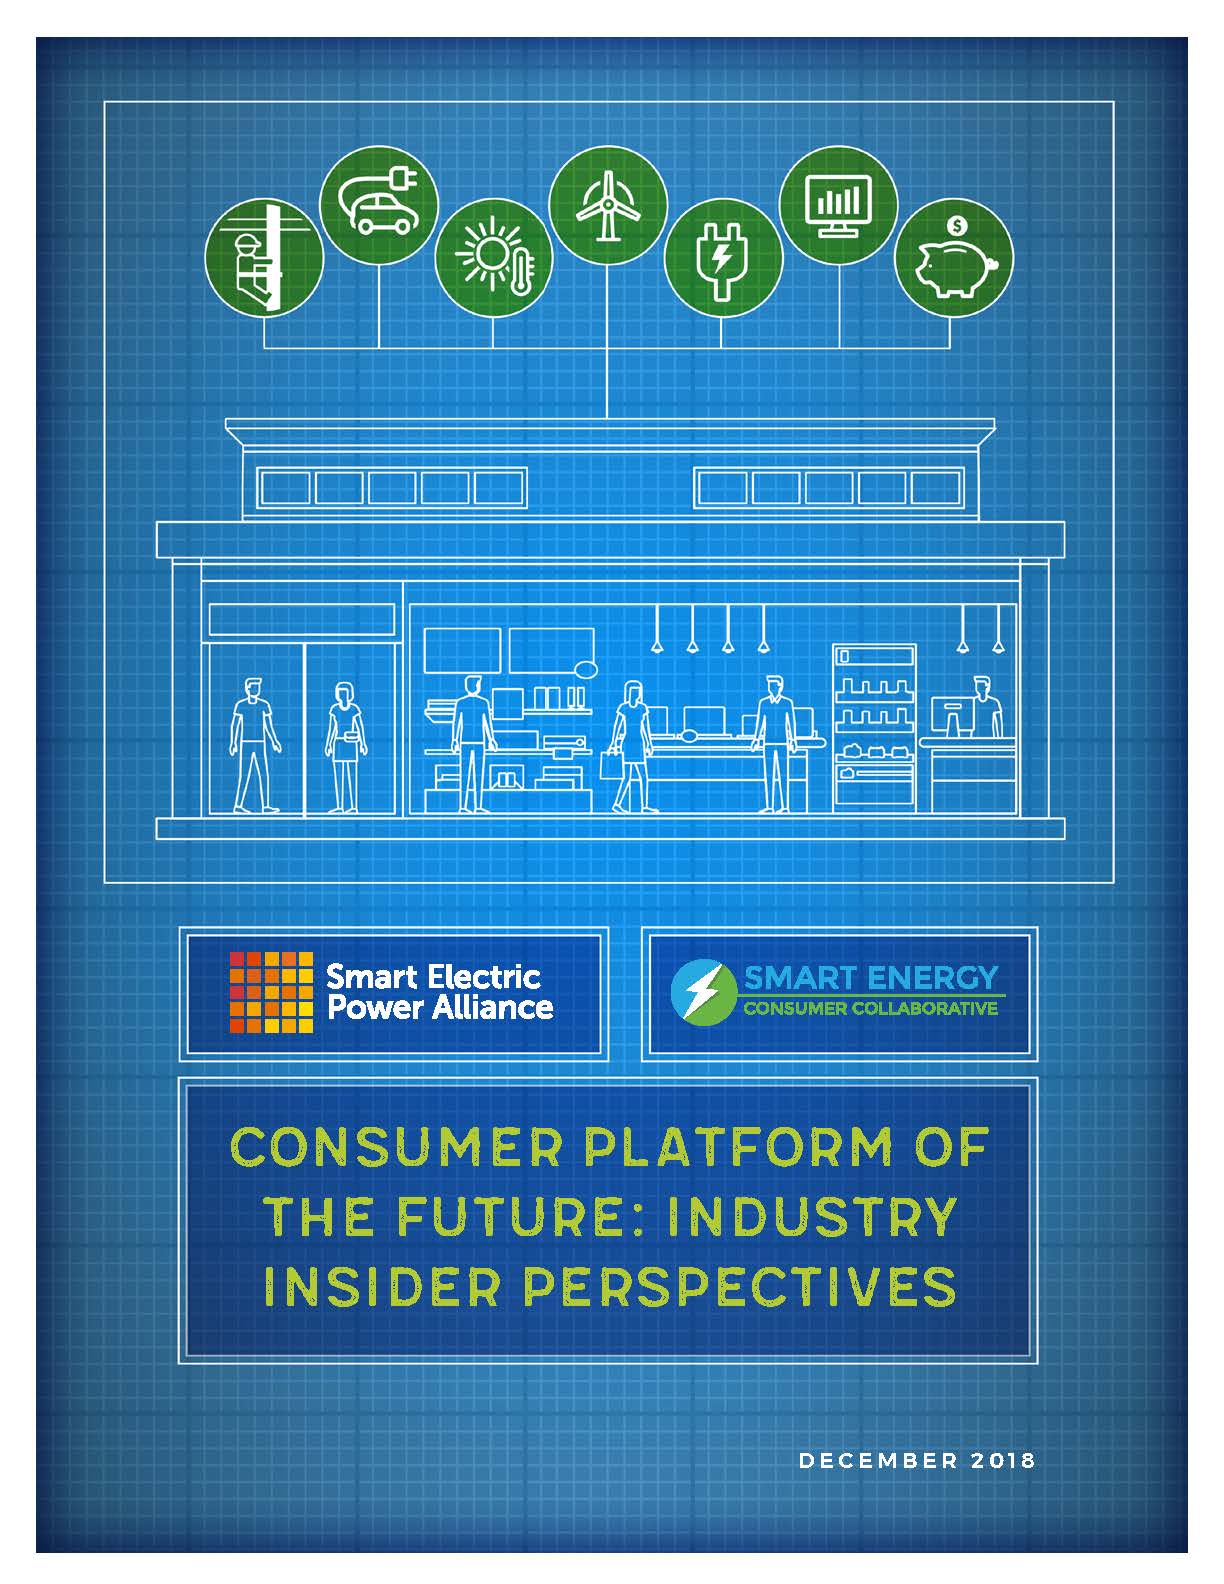 Consumer Platform of the Future: Industry Insider Perspectives